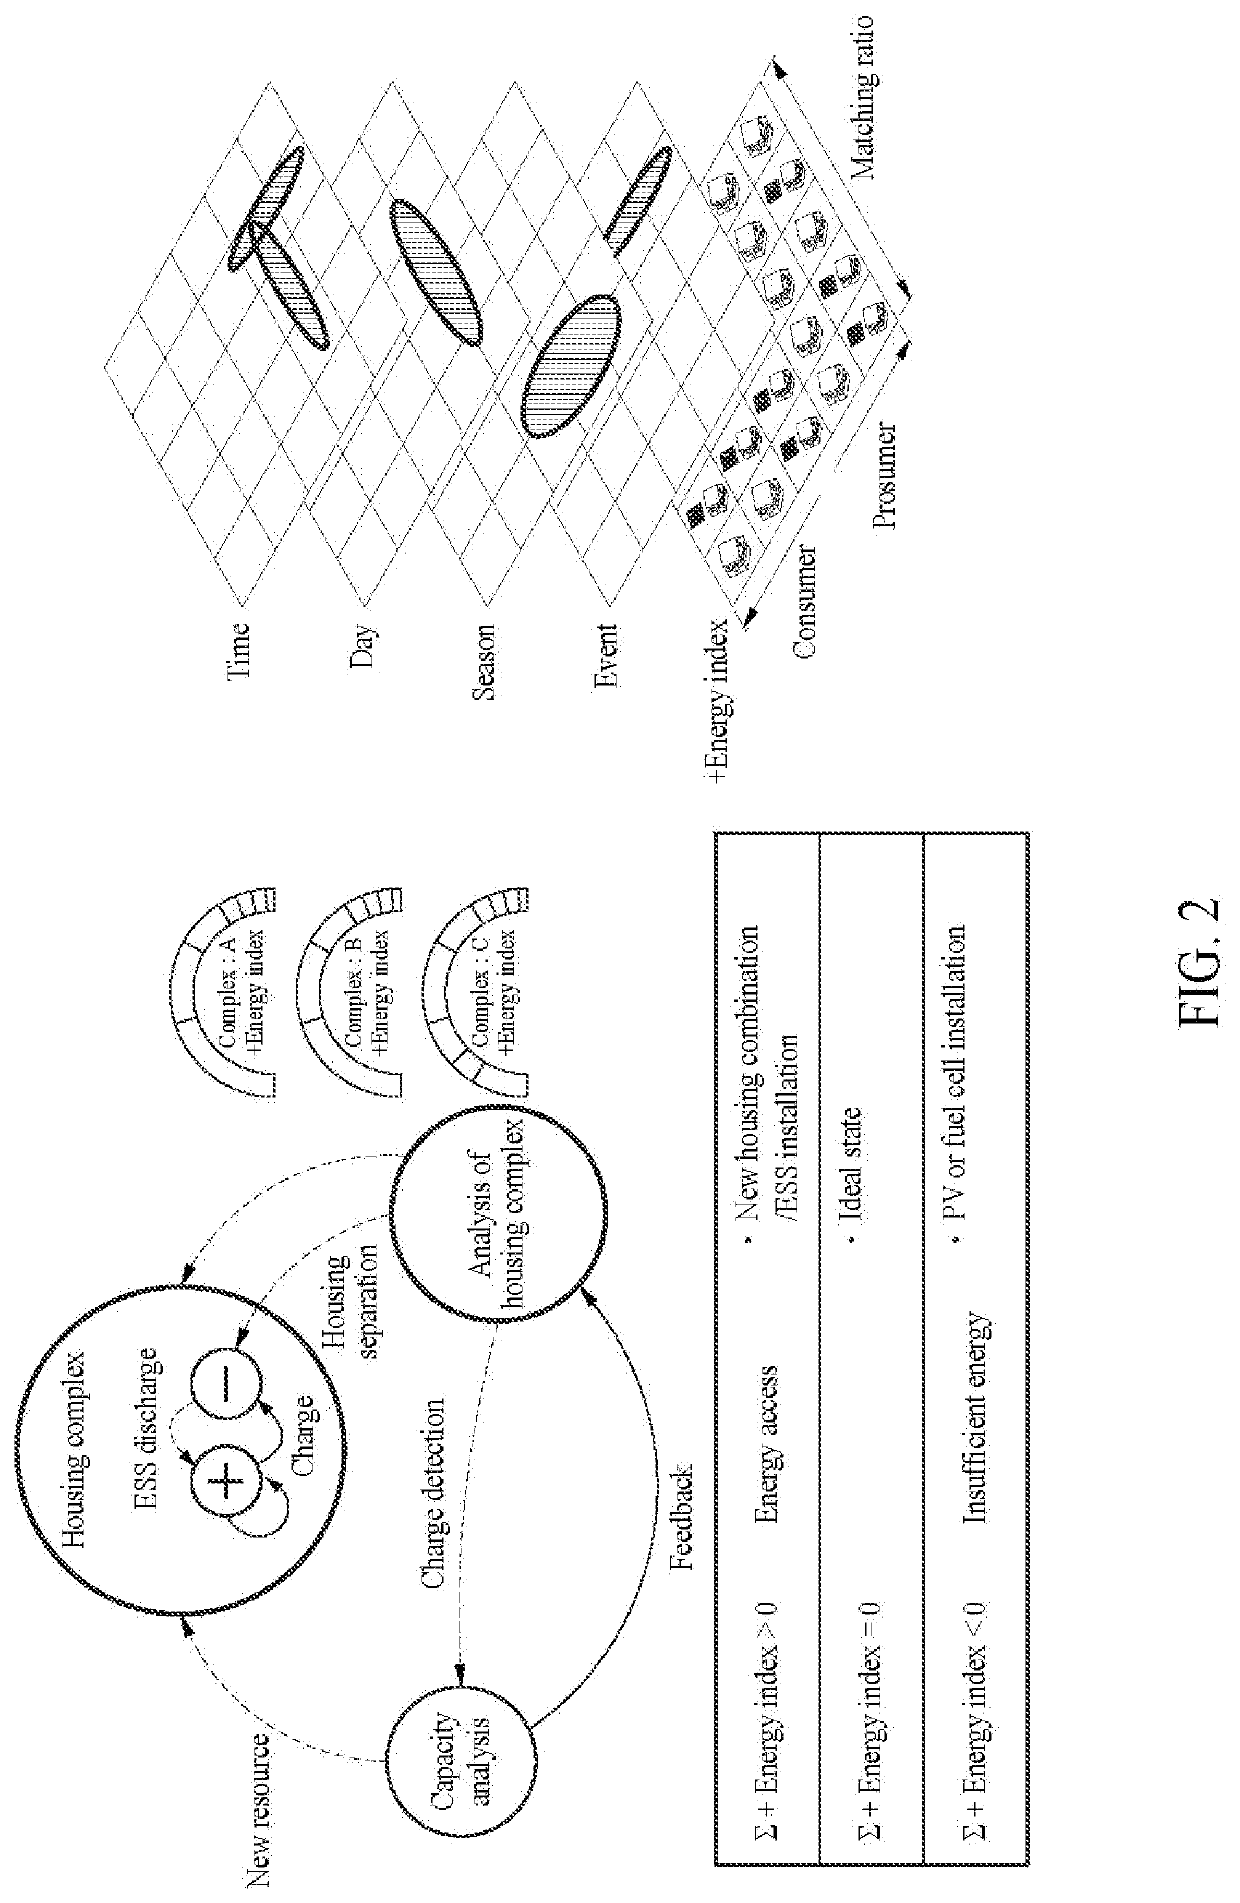 Electricity management apparatus for trading dump power for housing, and housing complex association method